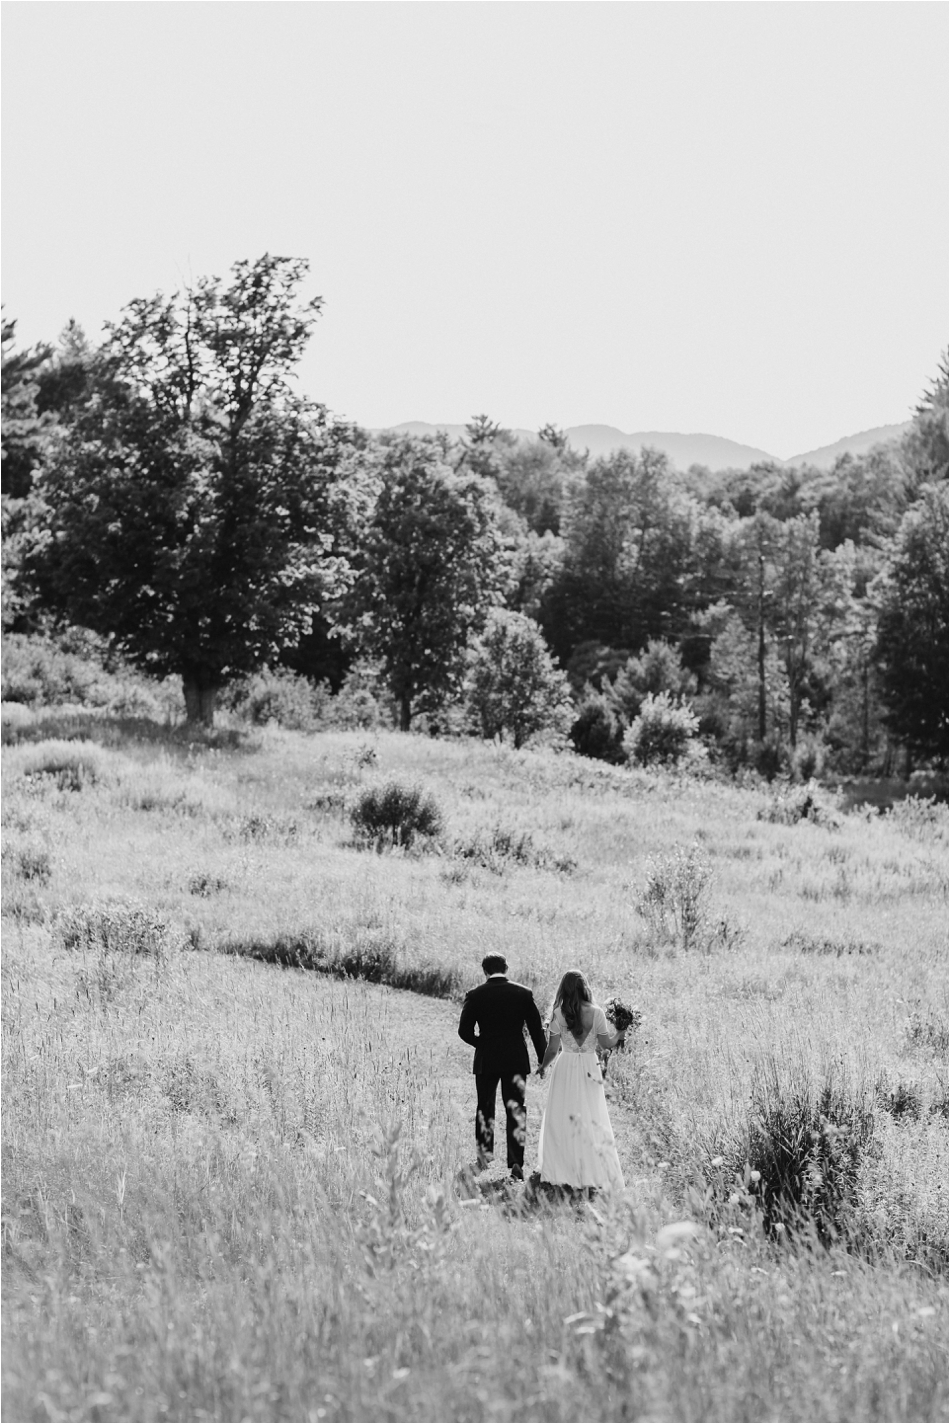 Kayla and Bill’s intimate wedding at The Bark Eater Inn in the Adirondack Mountains | Shaw Photo Co.